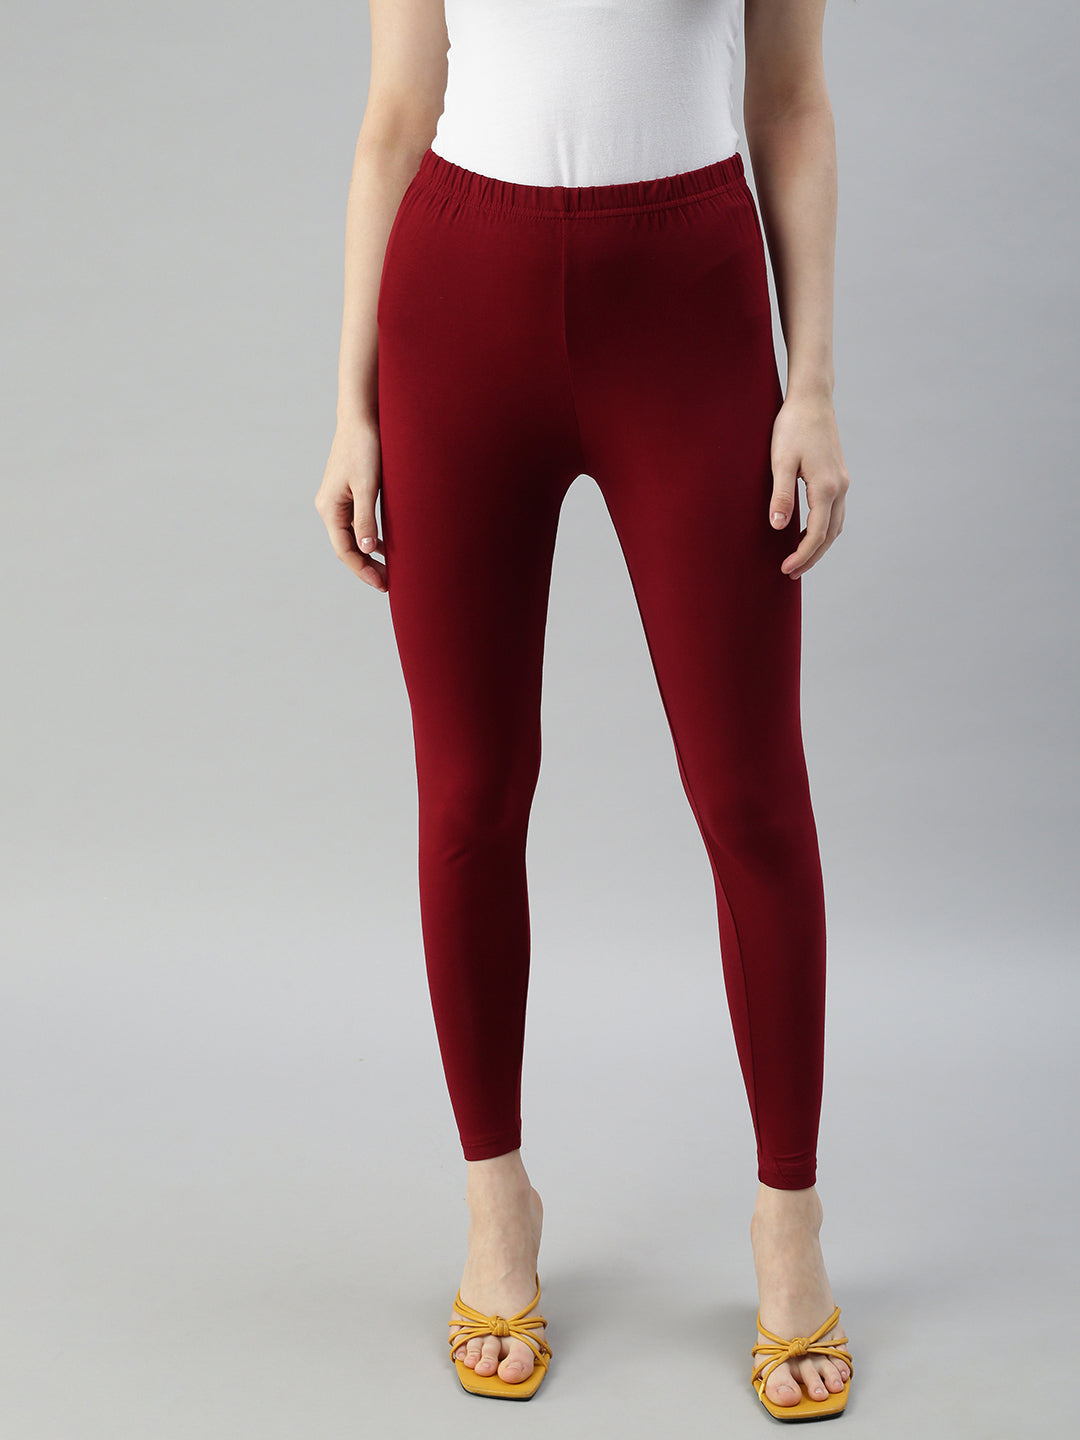 Shop Prisma's Frenchwine Ankle Leggings for Stylish Comfort